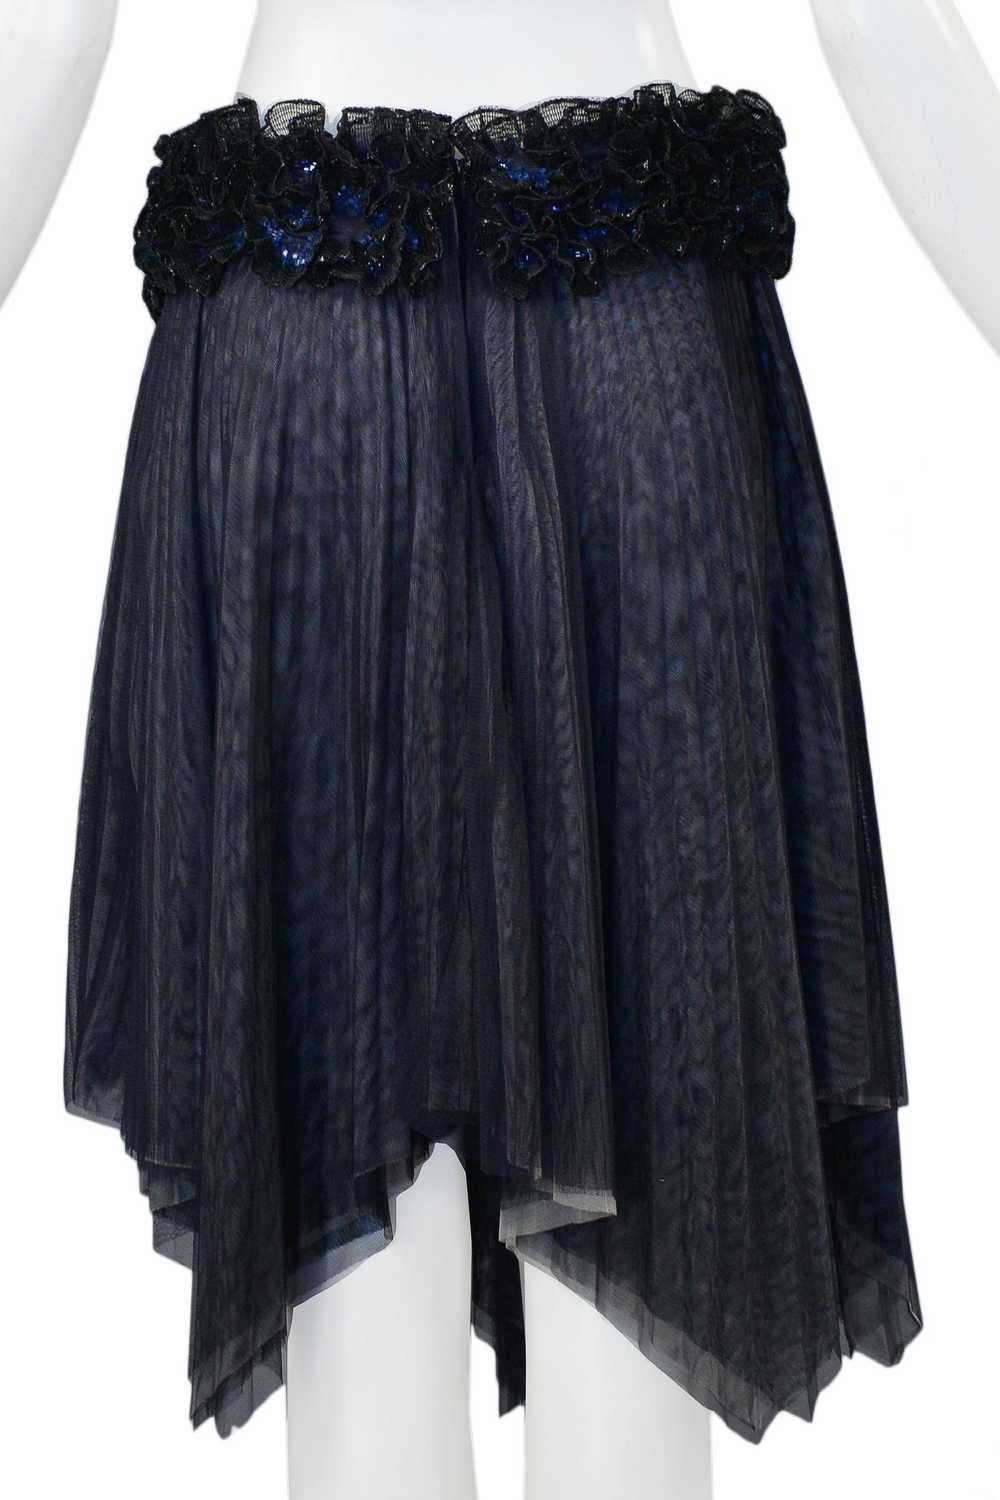 CHANEL PLEATED SKIRT WITH FLORAL SEQUIN WAISTBAND - image 6